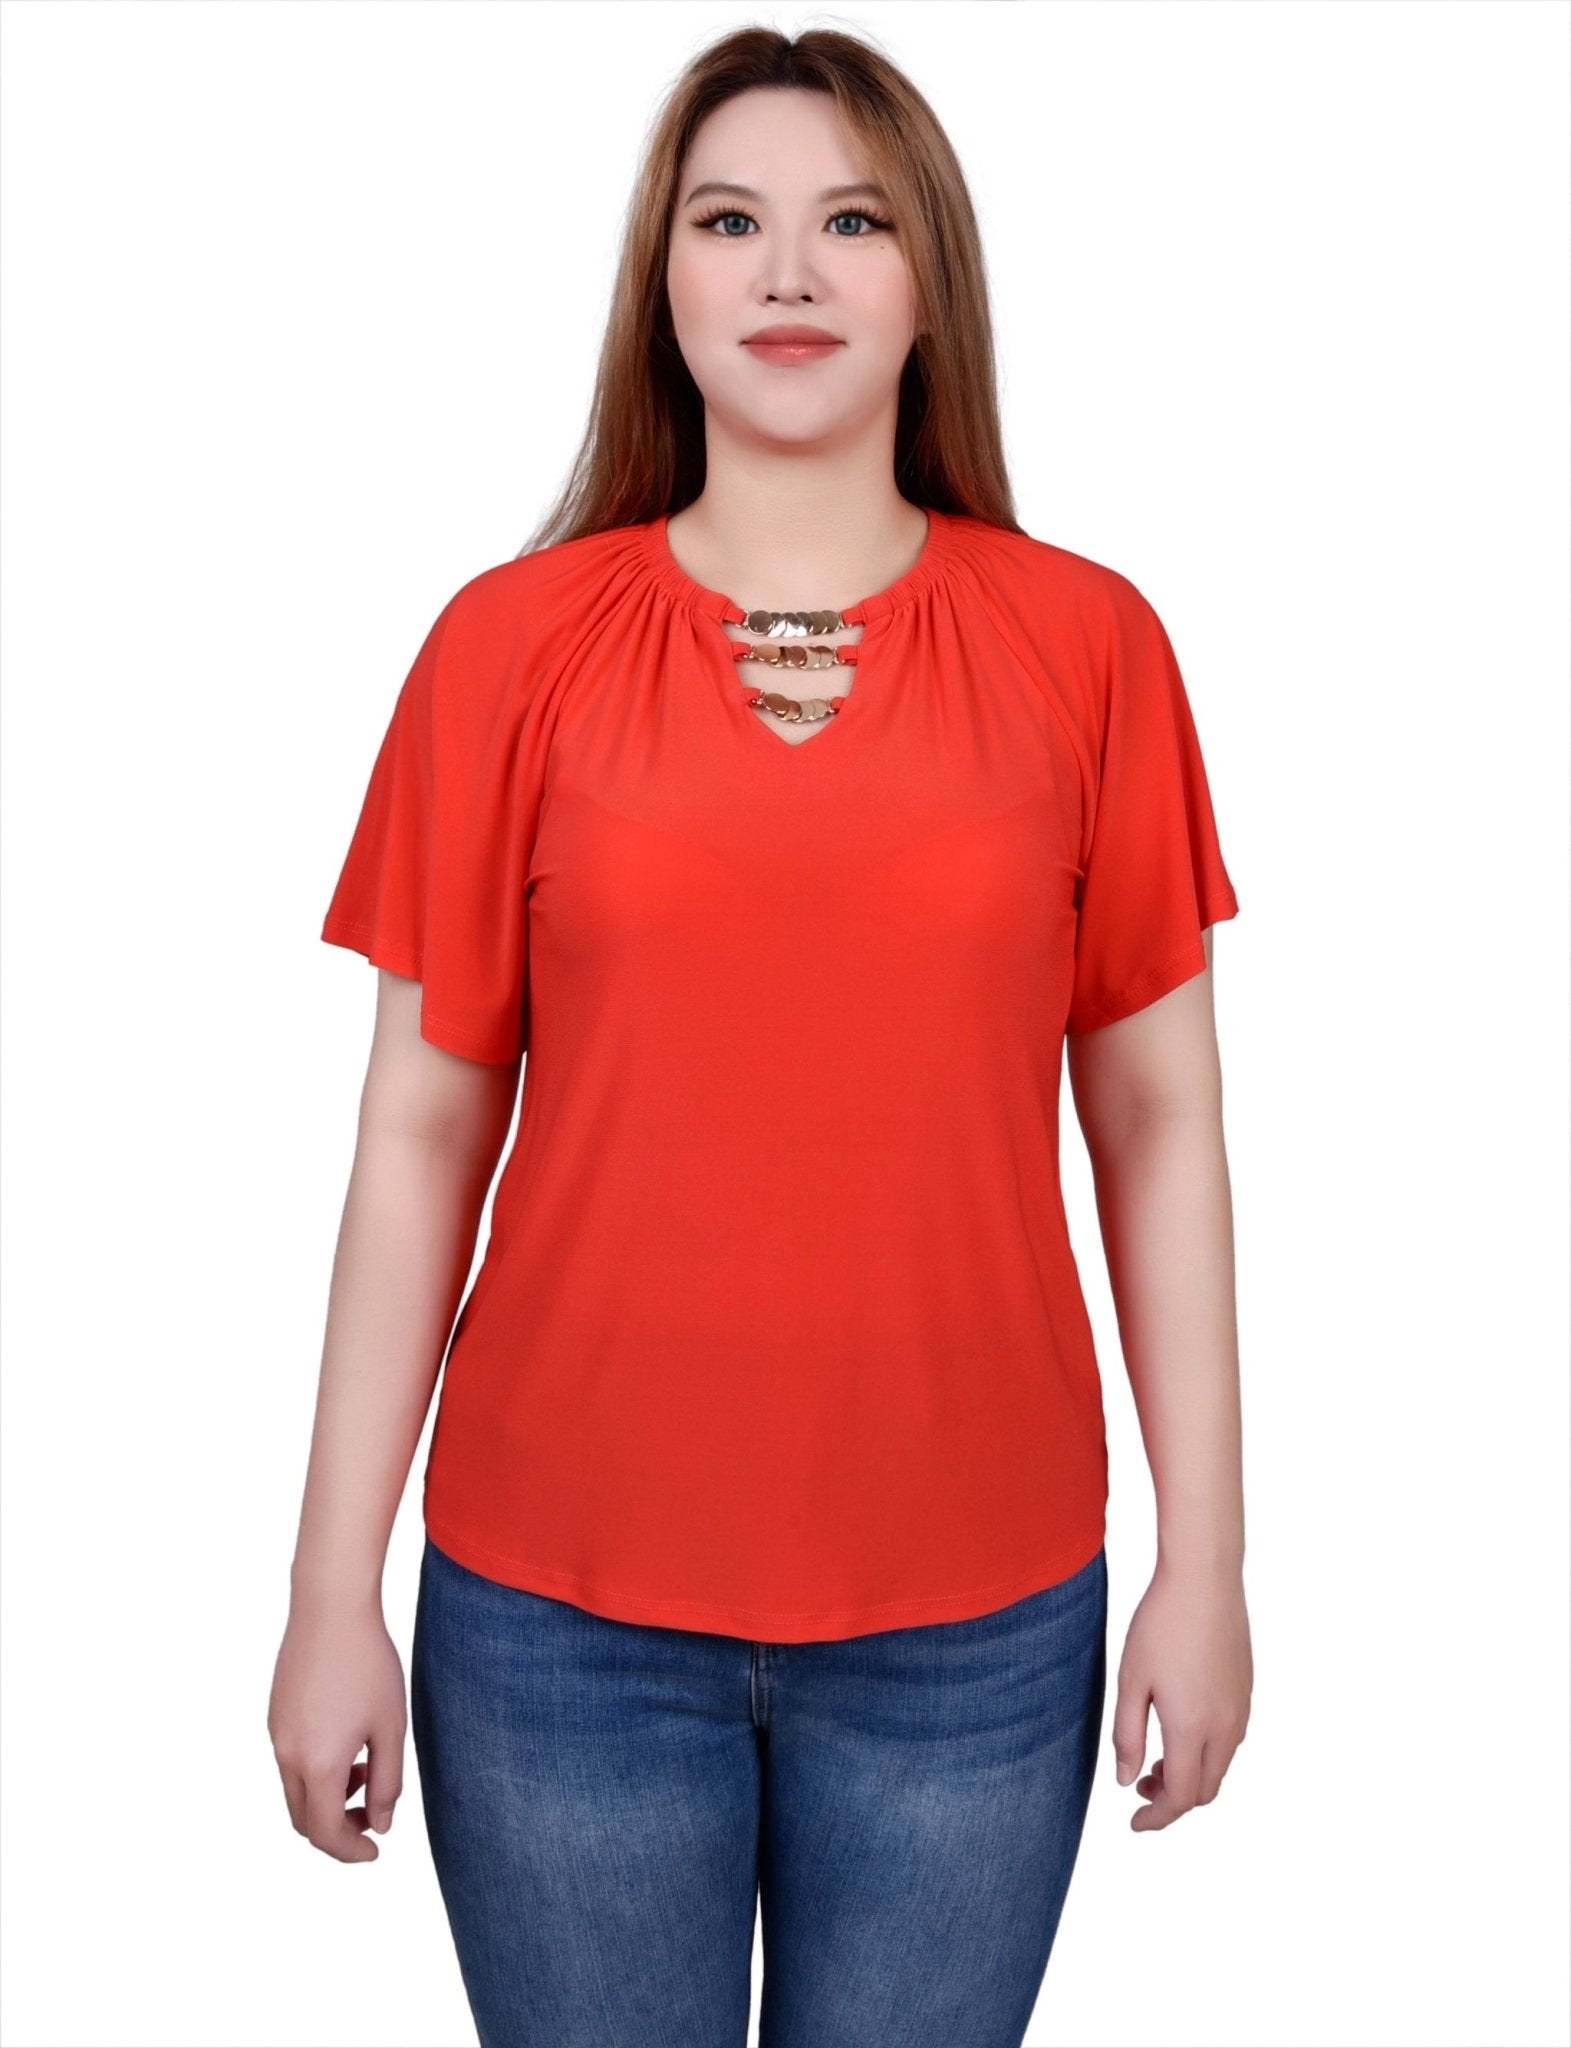 NY Collection Raglan Sleeve Top With Chain Details - Petite - DressbarnShirts & Blouses